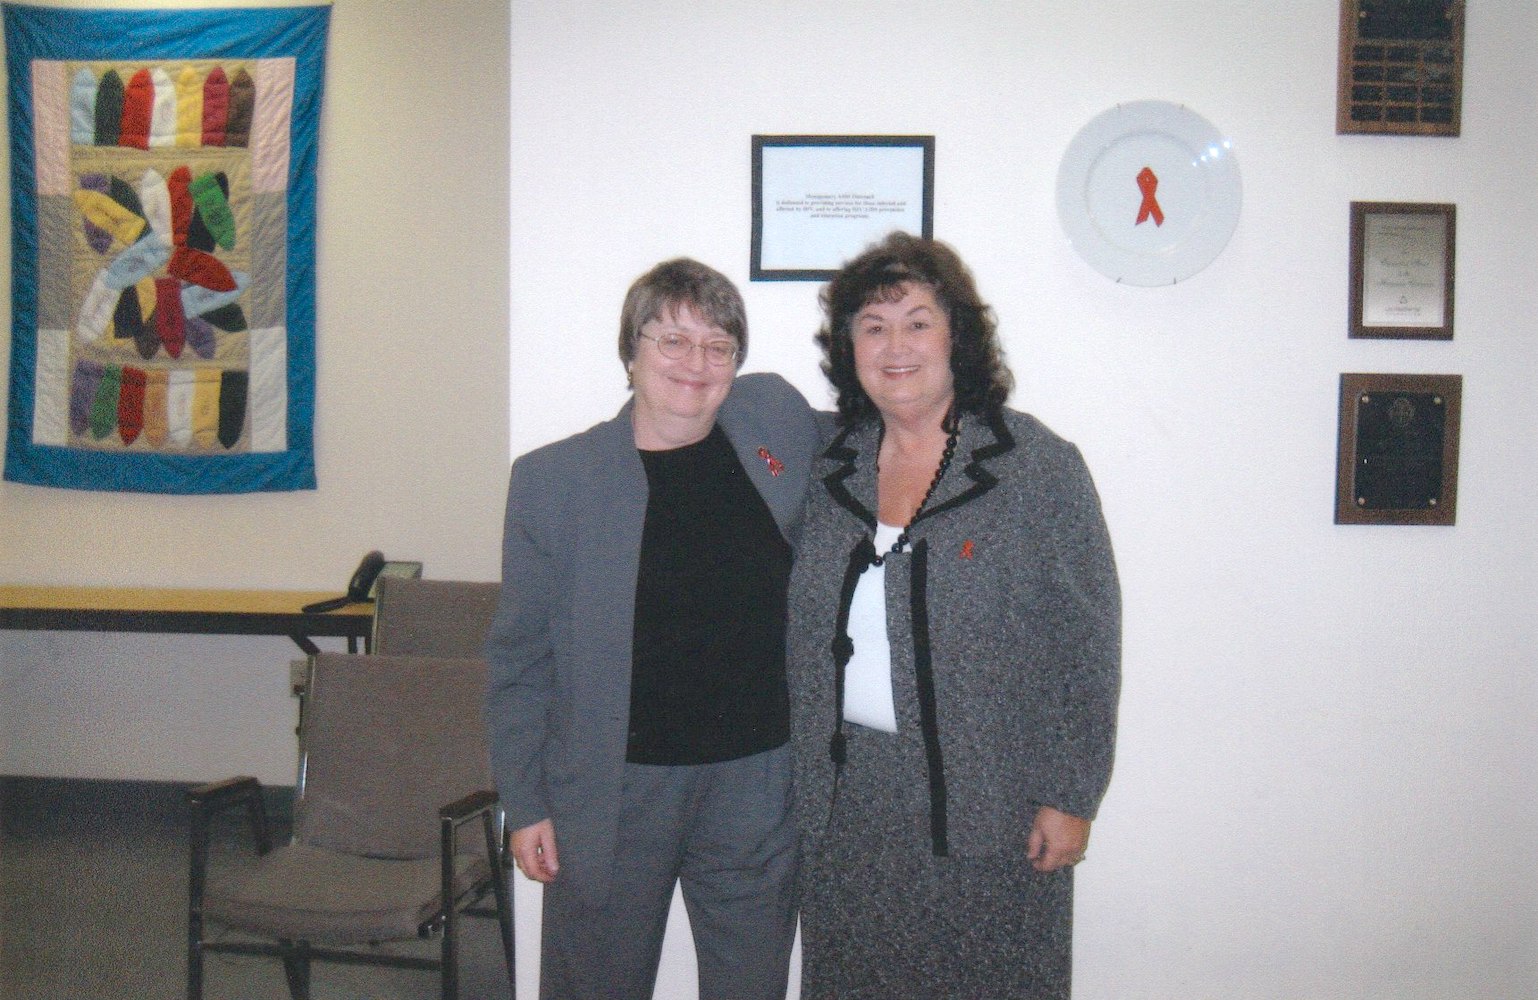 Kathie Hiers with Jeanne White-Ginder (Ryan White’s mother), 2007. Photo courtesy of Kathie Hiers.